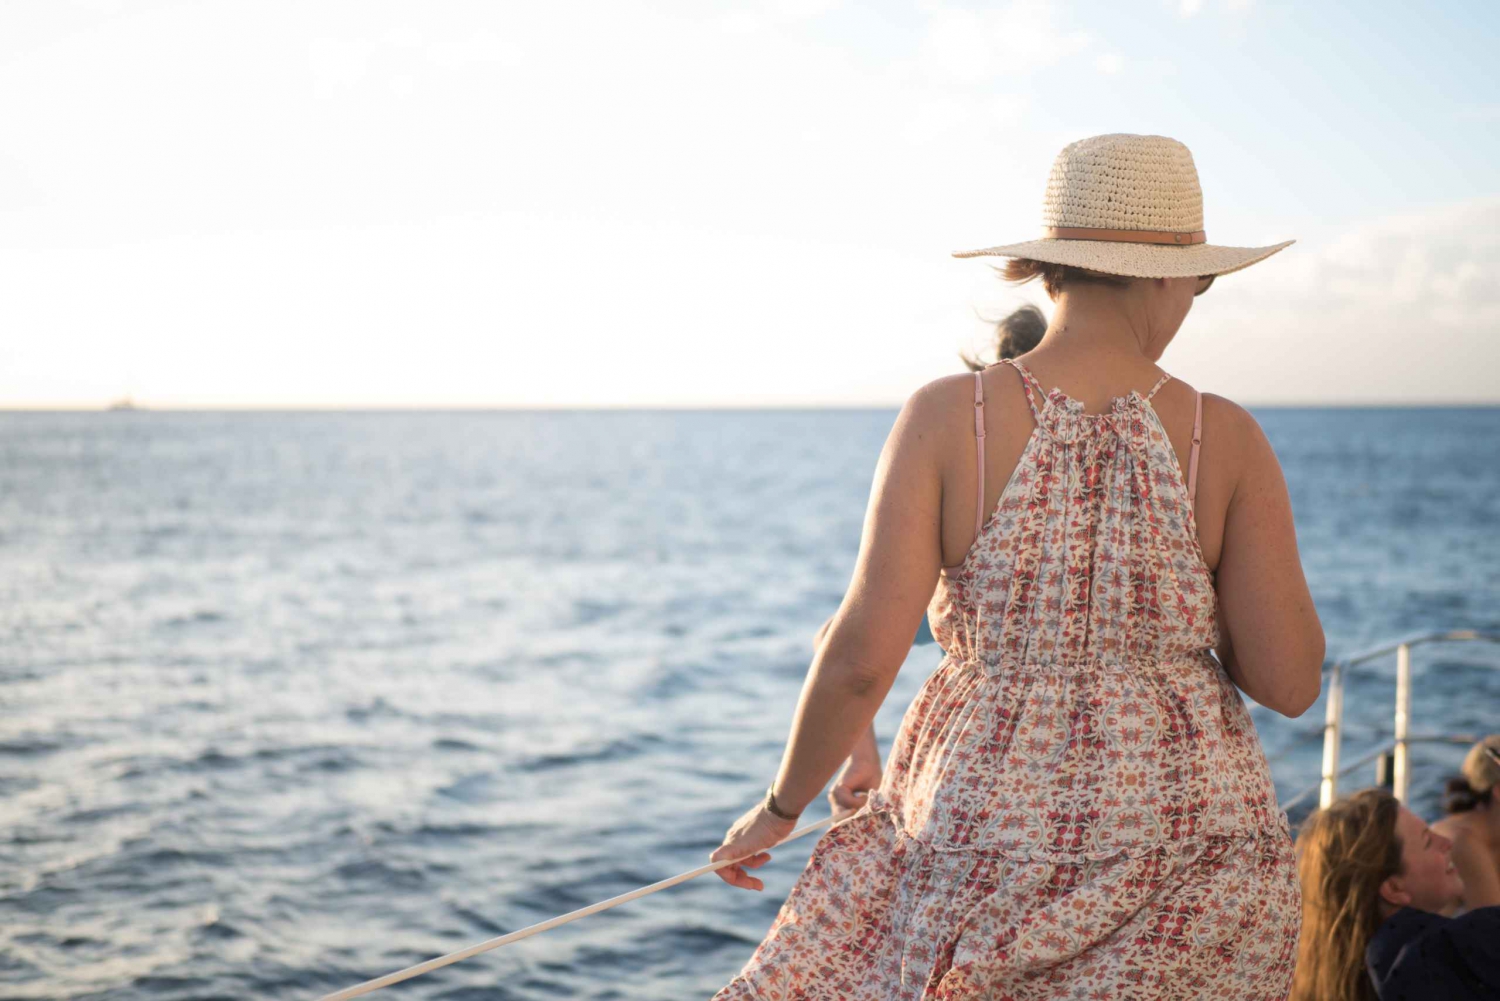 Maui: Sunset Sailing Cruise with Champagne from Lahaina